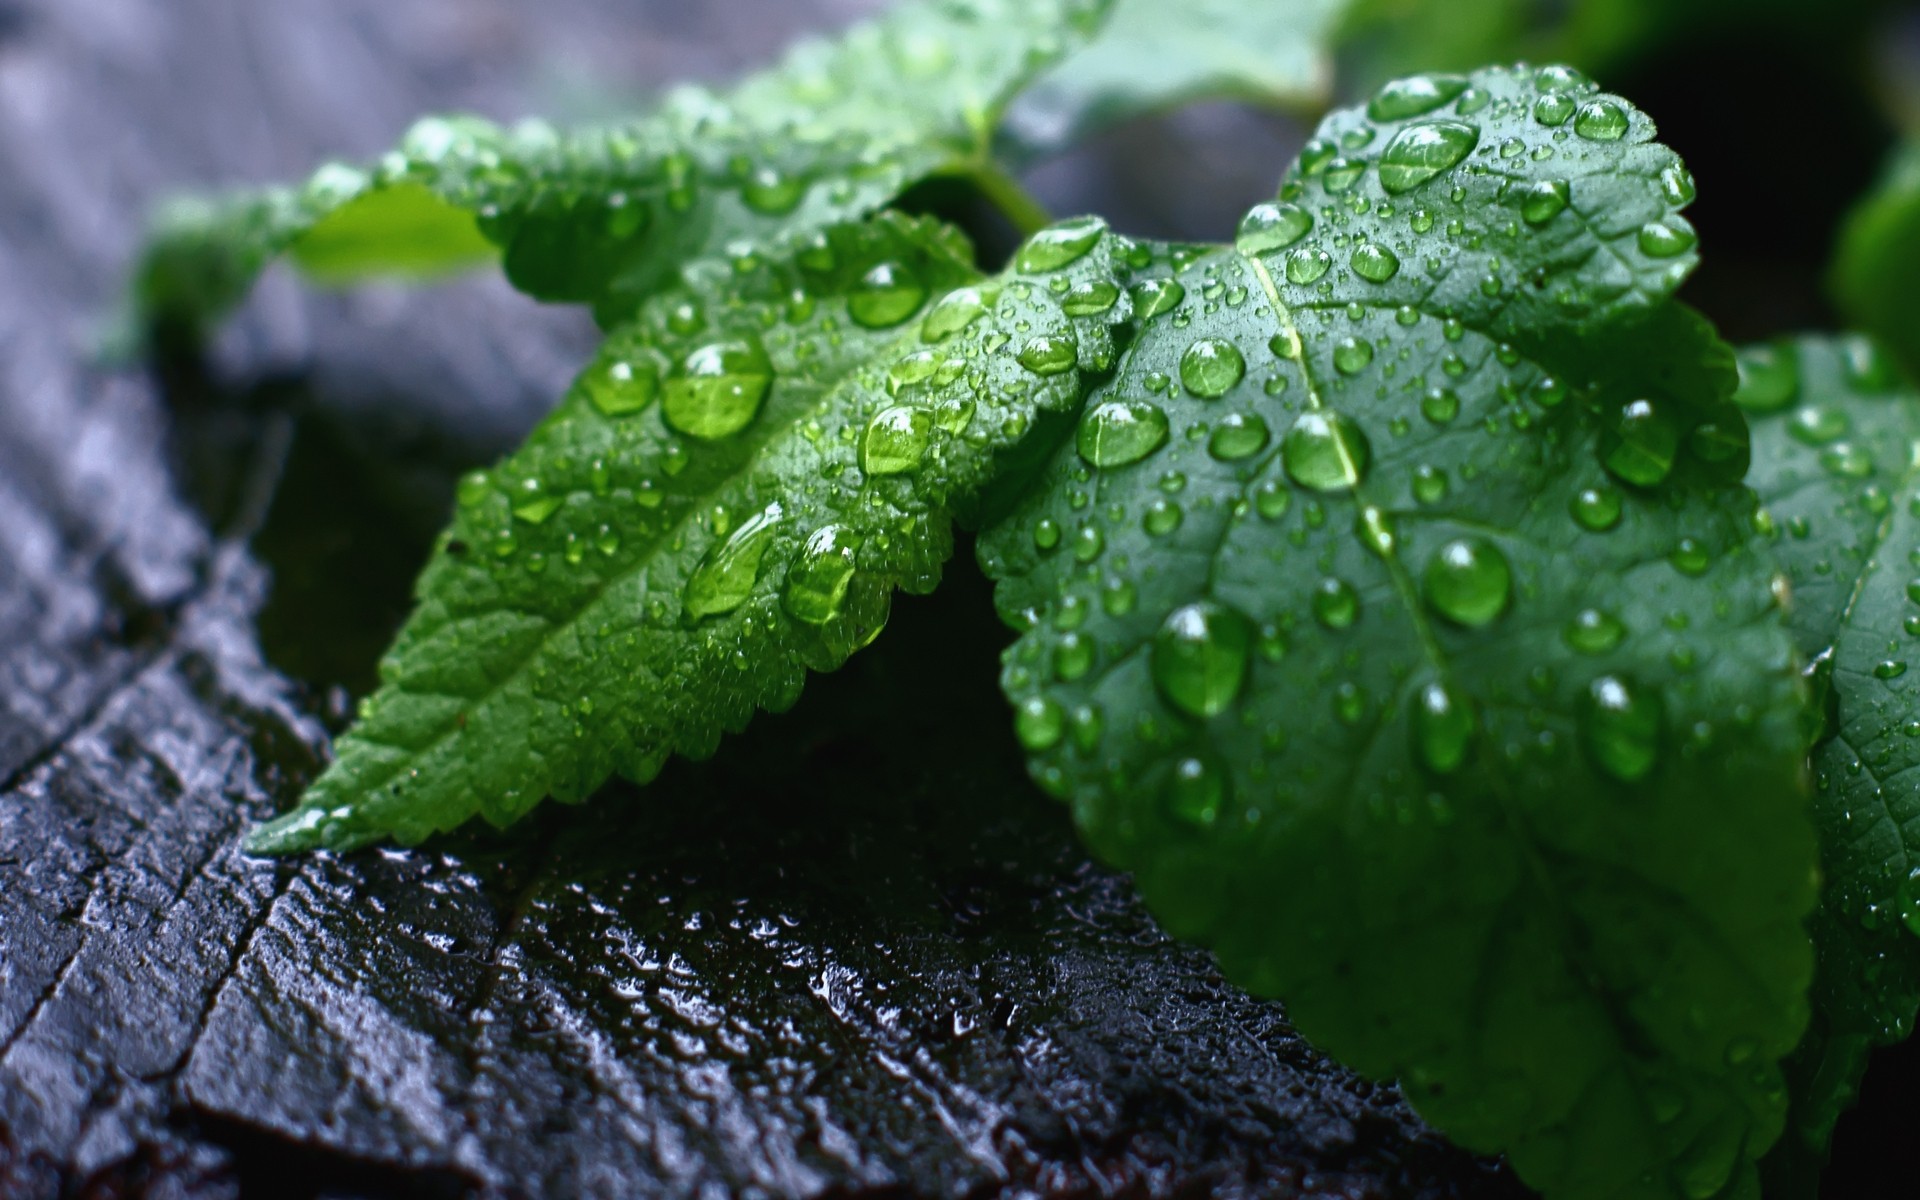 plants leaf flora drop rain nature dew growth freshness wet environment garden water close-up droplet herb purity fresh leaves